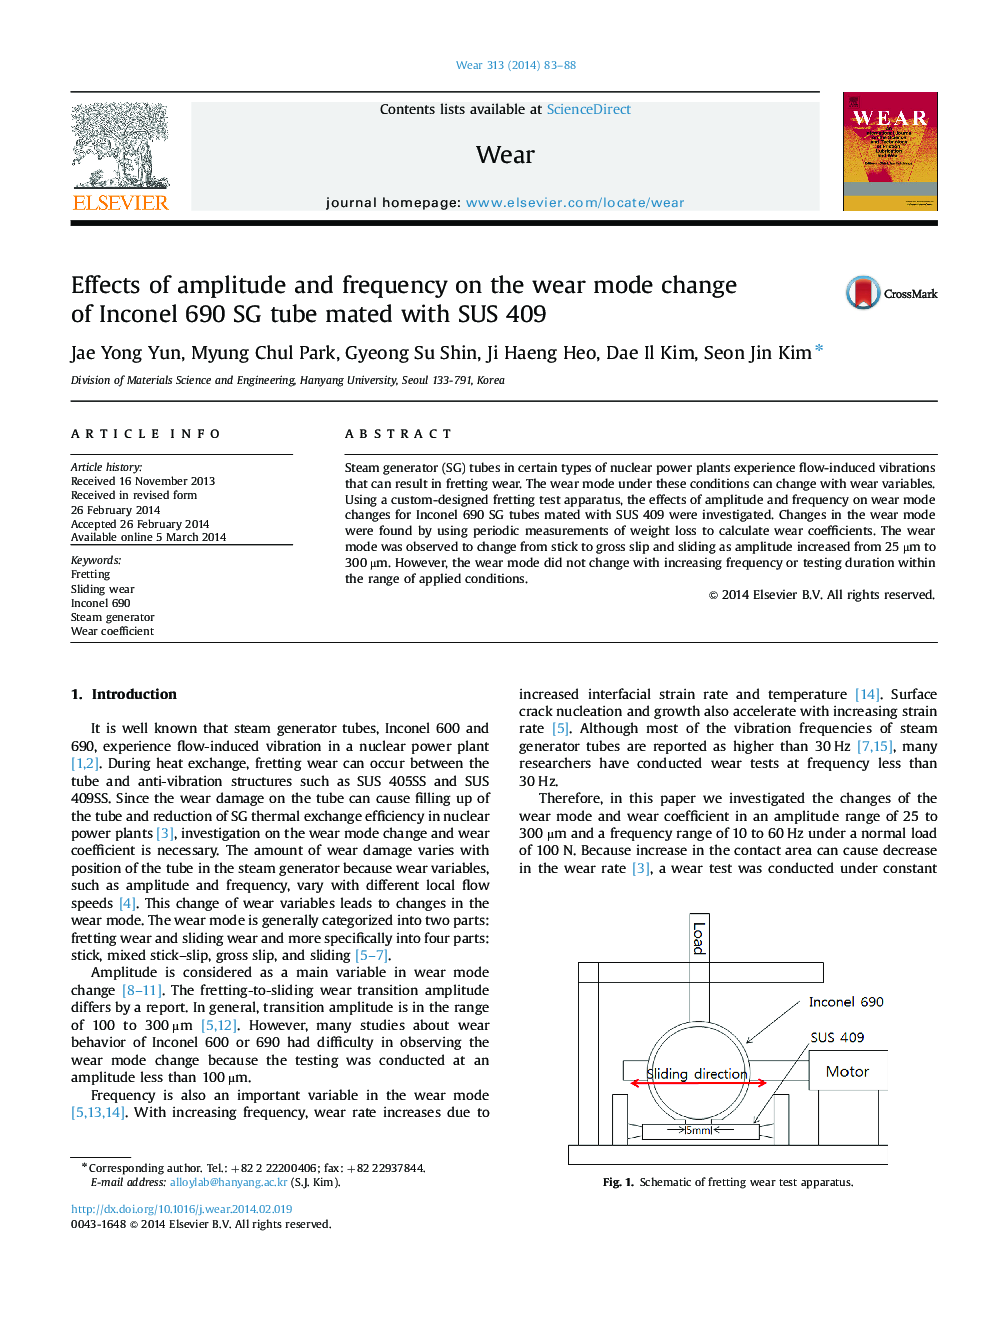 Effects of amplitude and frequency on the wear mode change of Inconel 690 SG tube mated with SUS 409